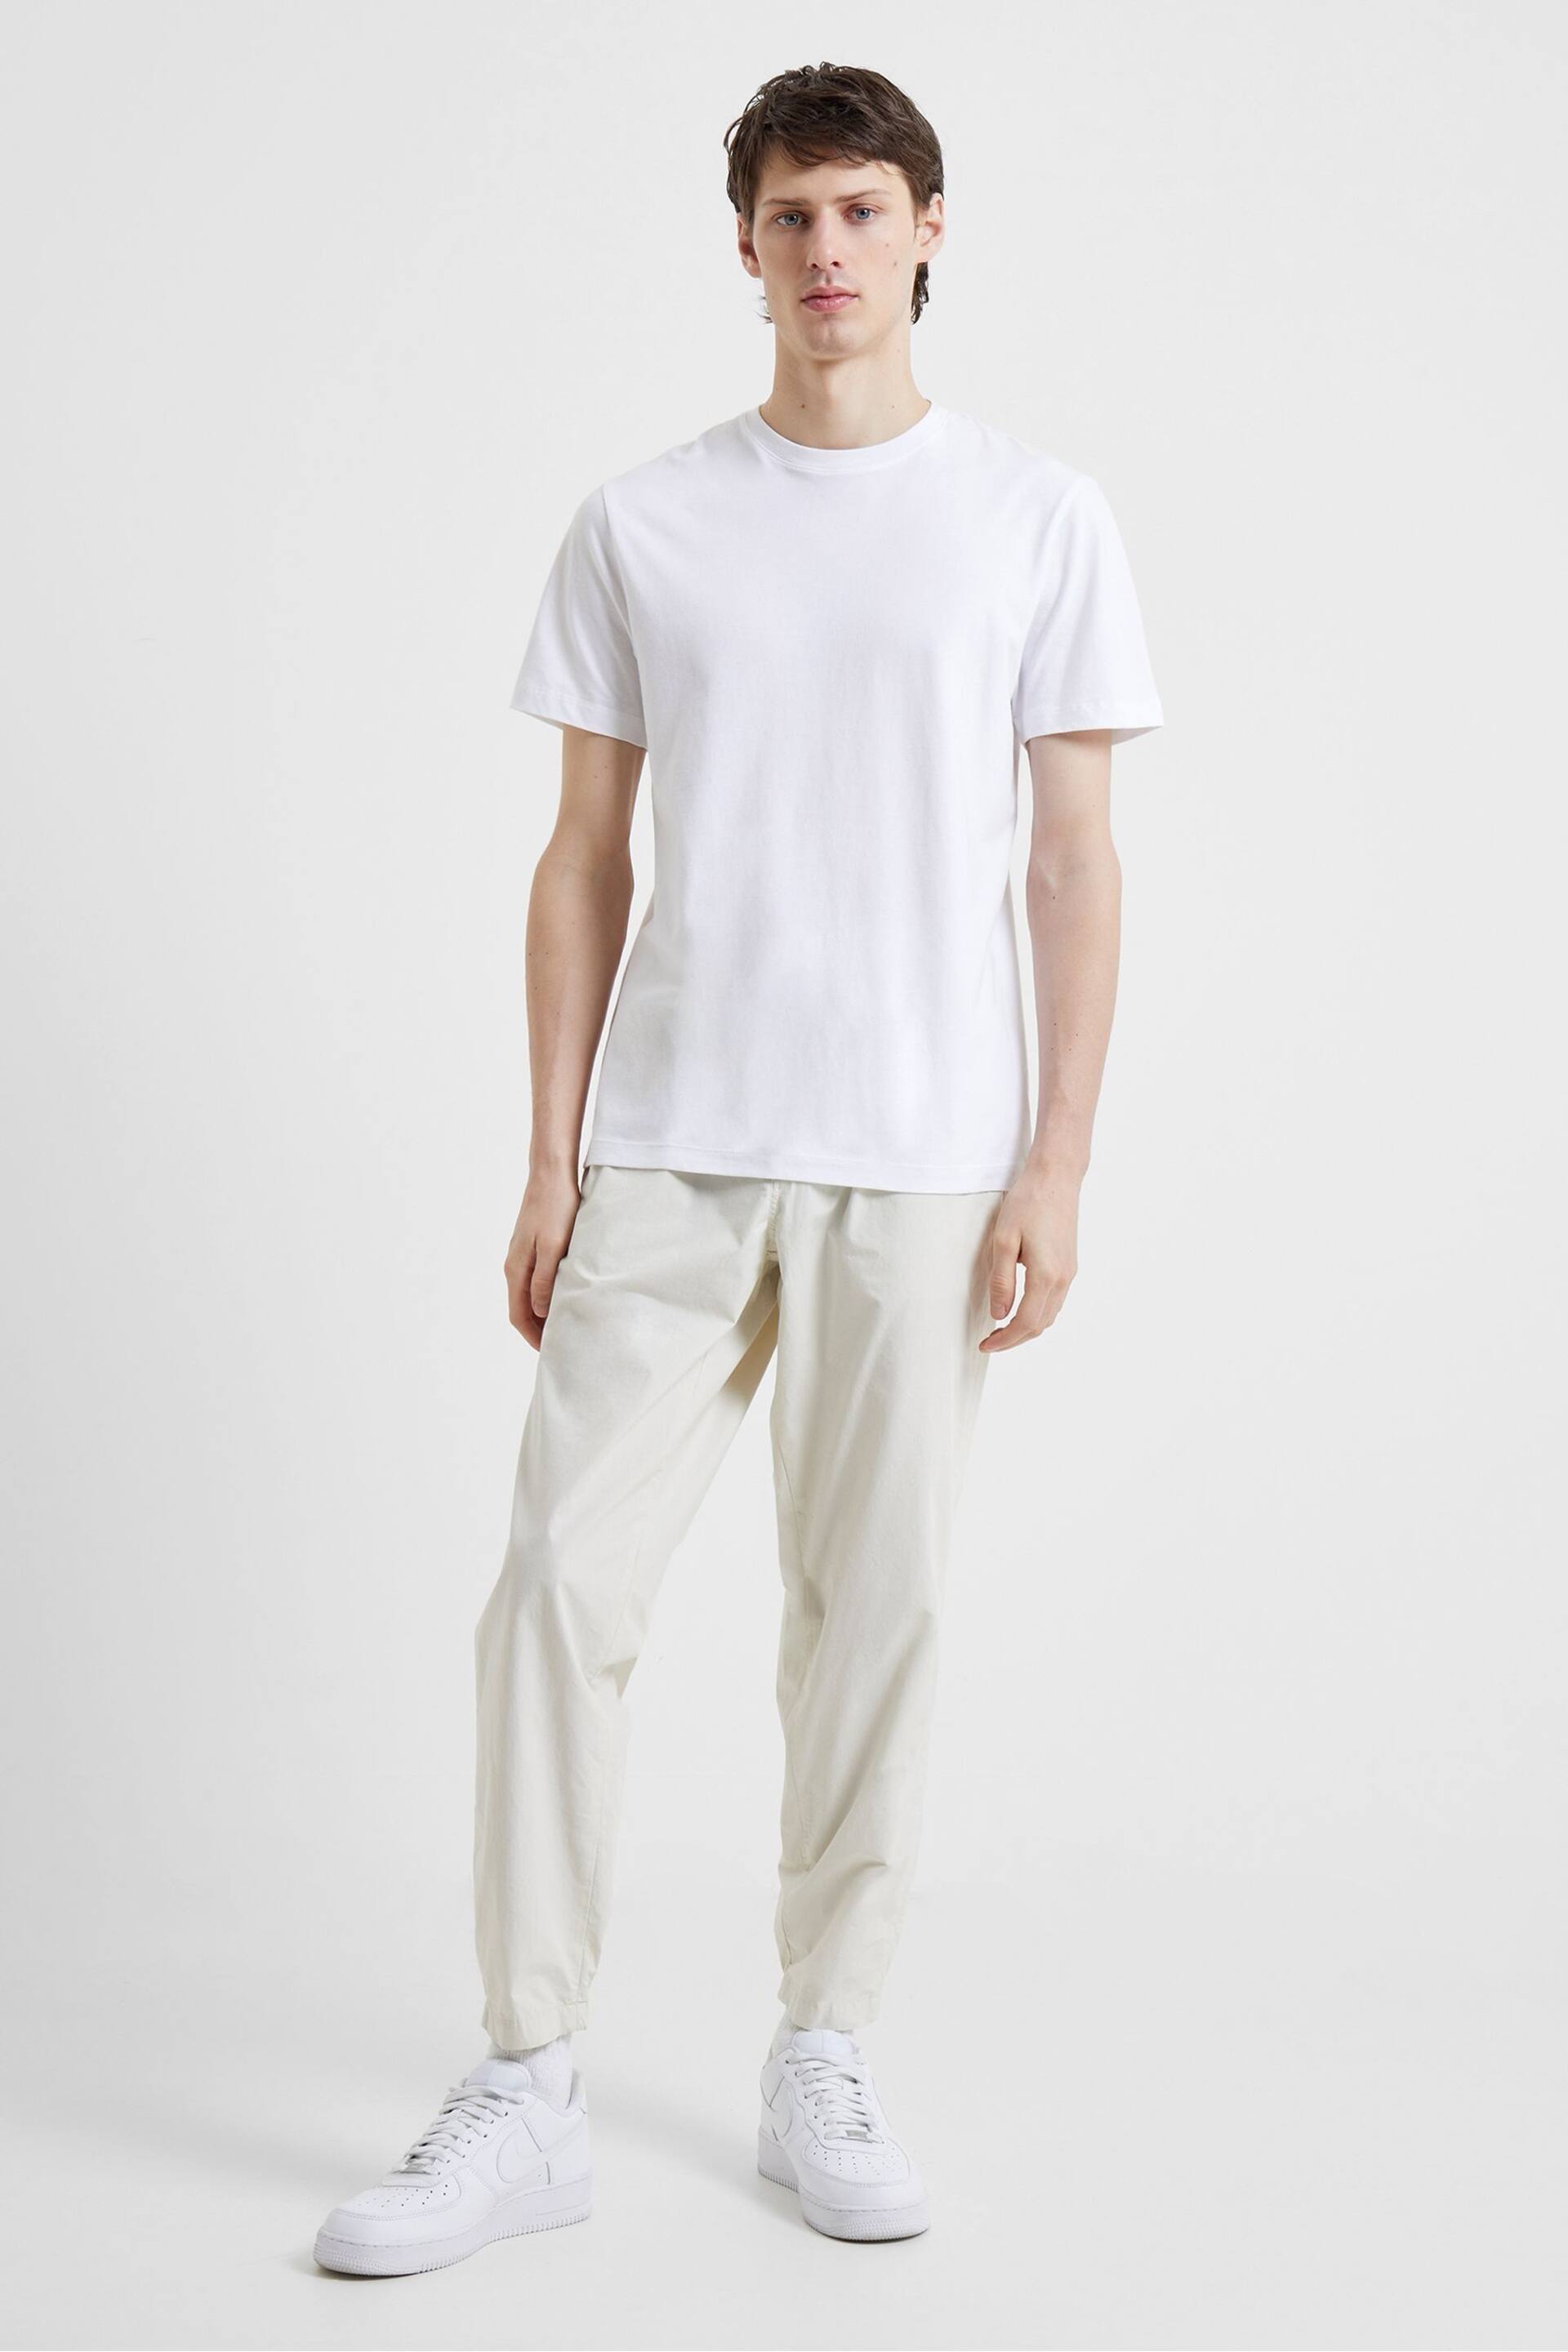 French Connection Military Cotton Tappered Chino Trousers - Image 1 of 4